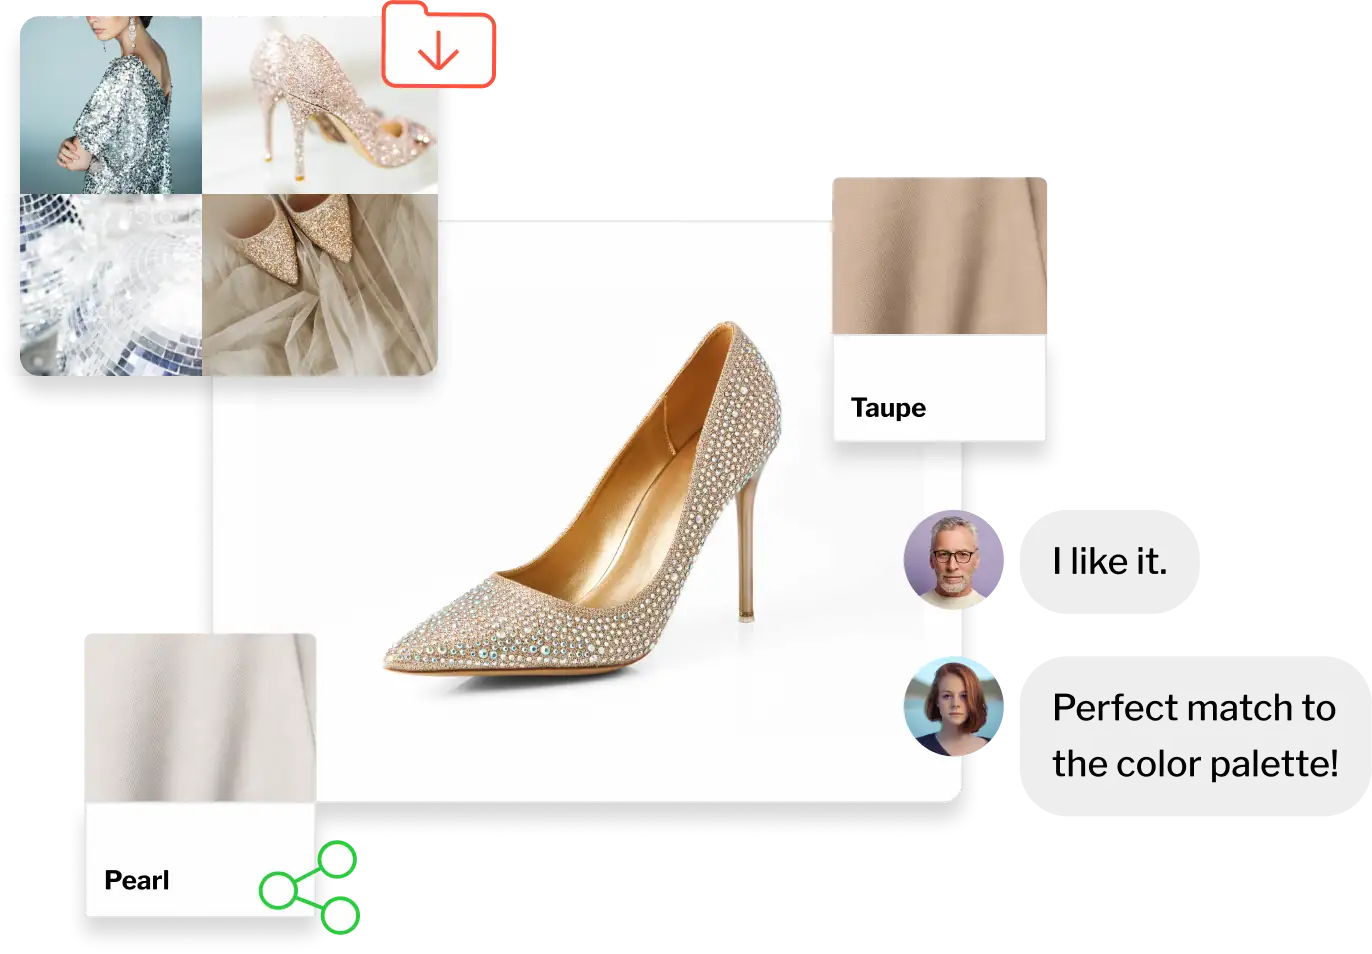 A couture heel surrounded by material swatches and inspirational moodboard imagery, with a chat overlaid.